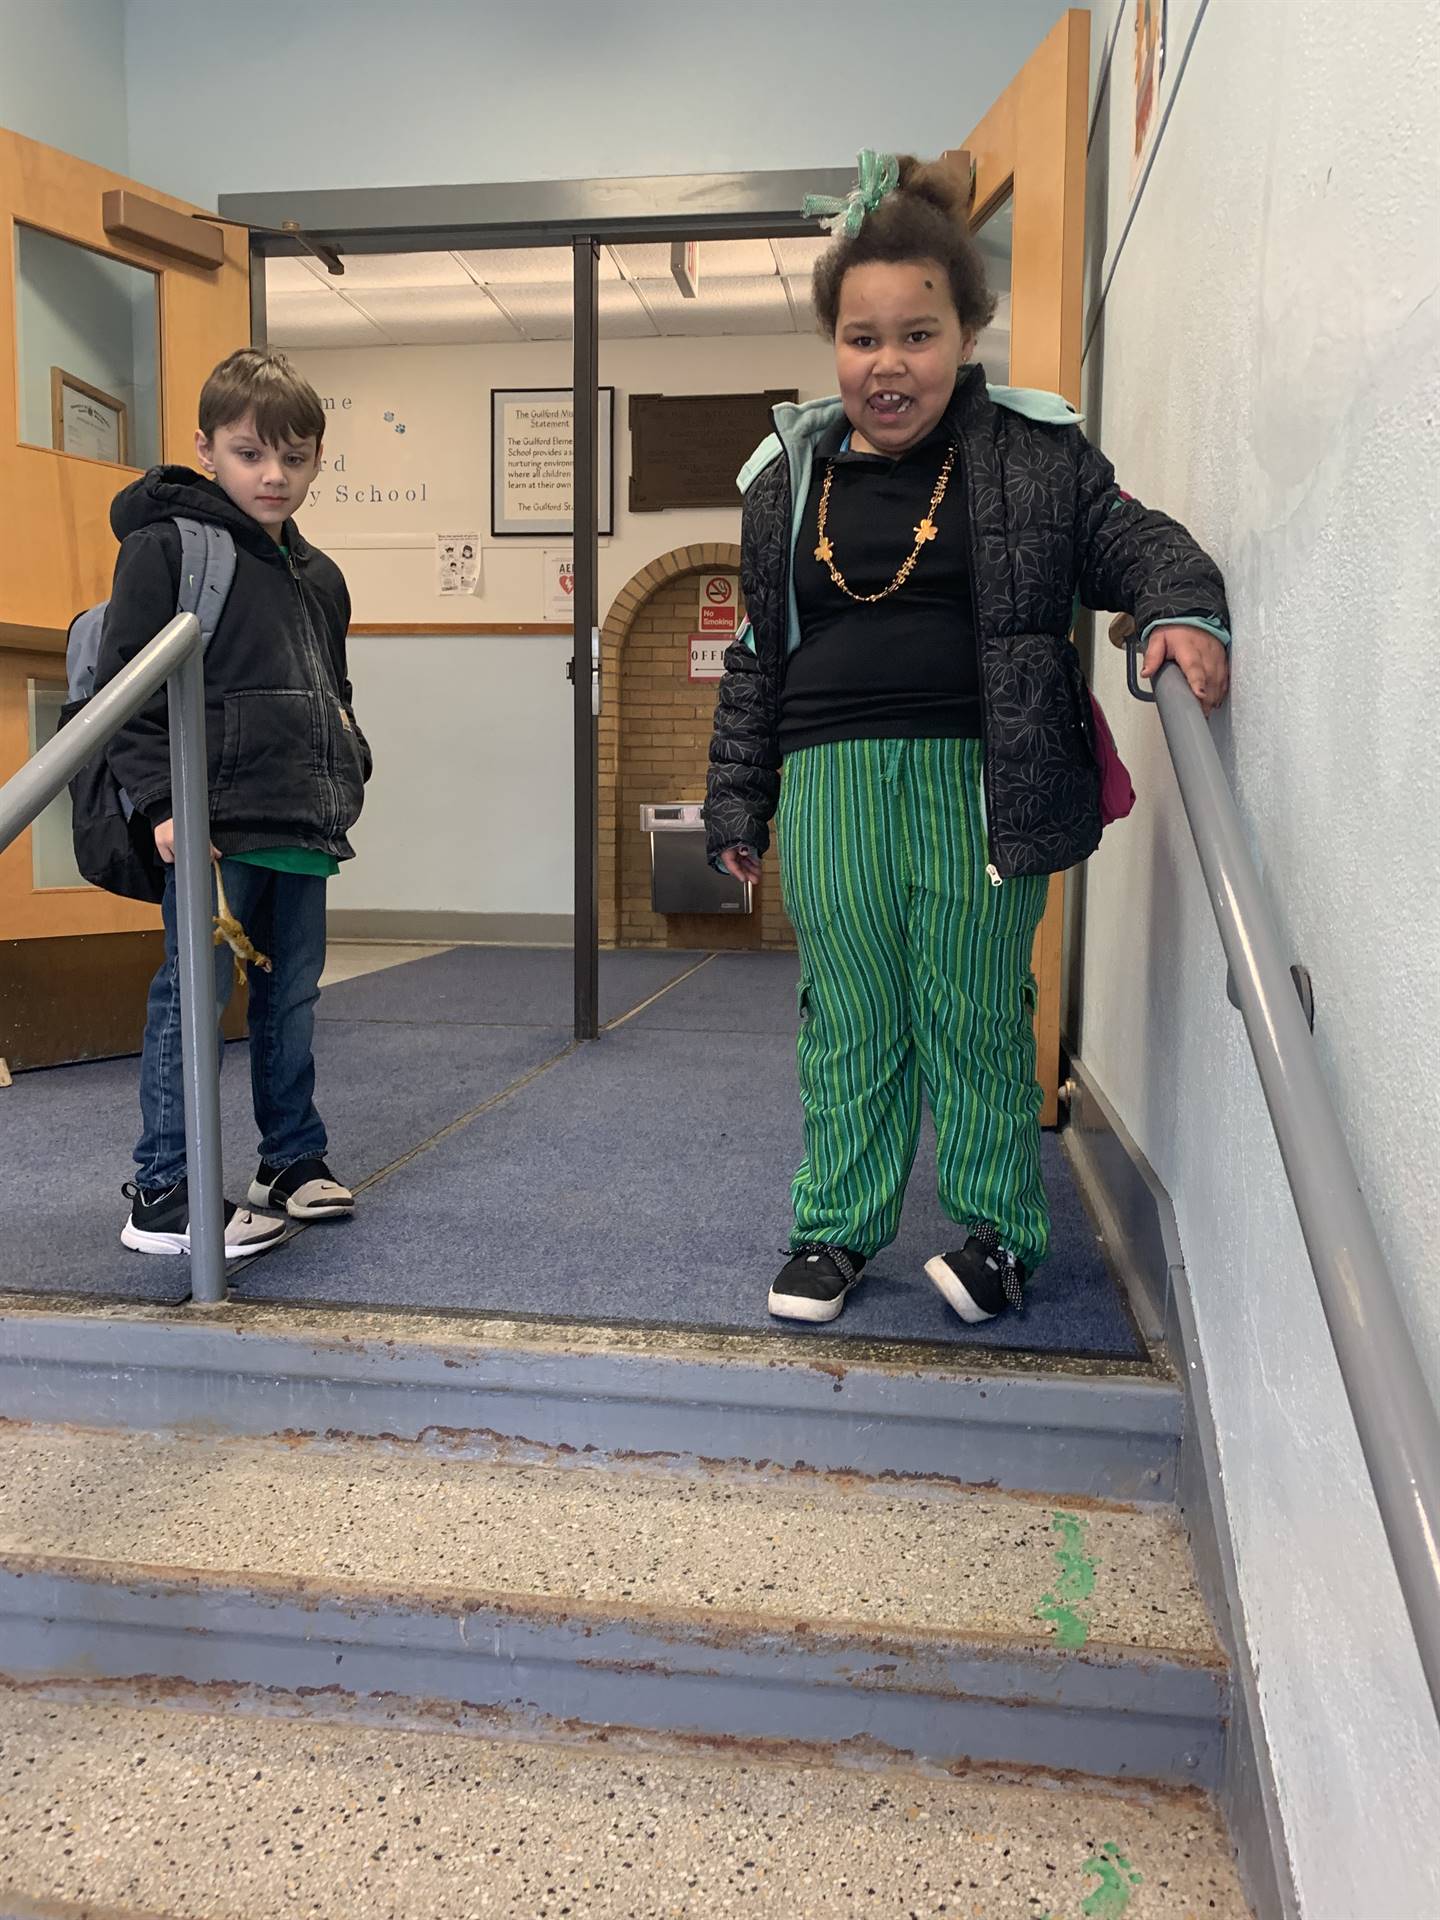 a student dressed in green coming up the stairs.